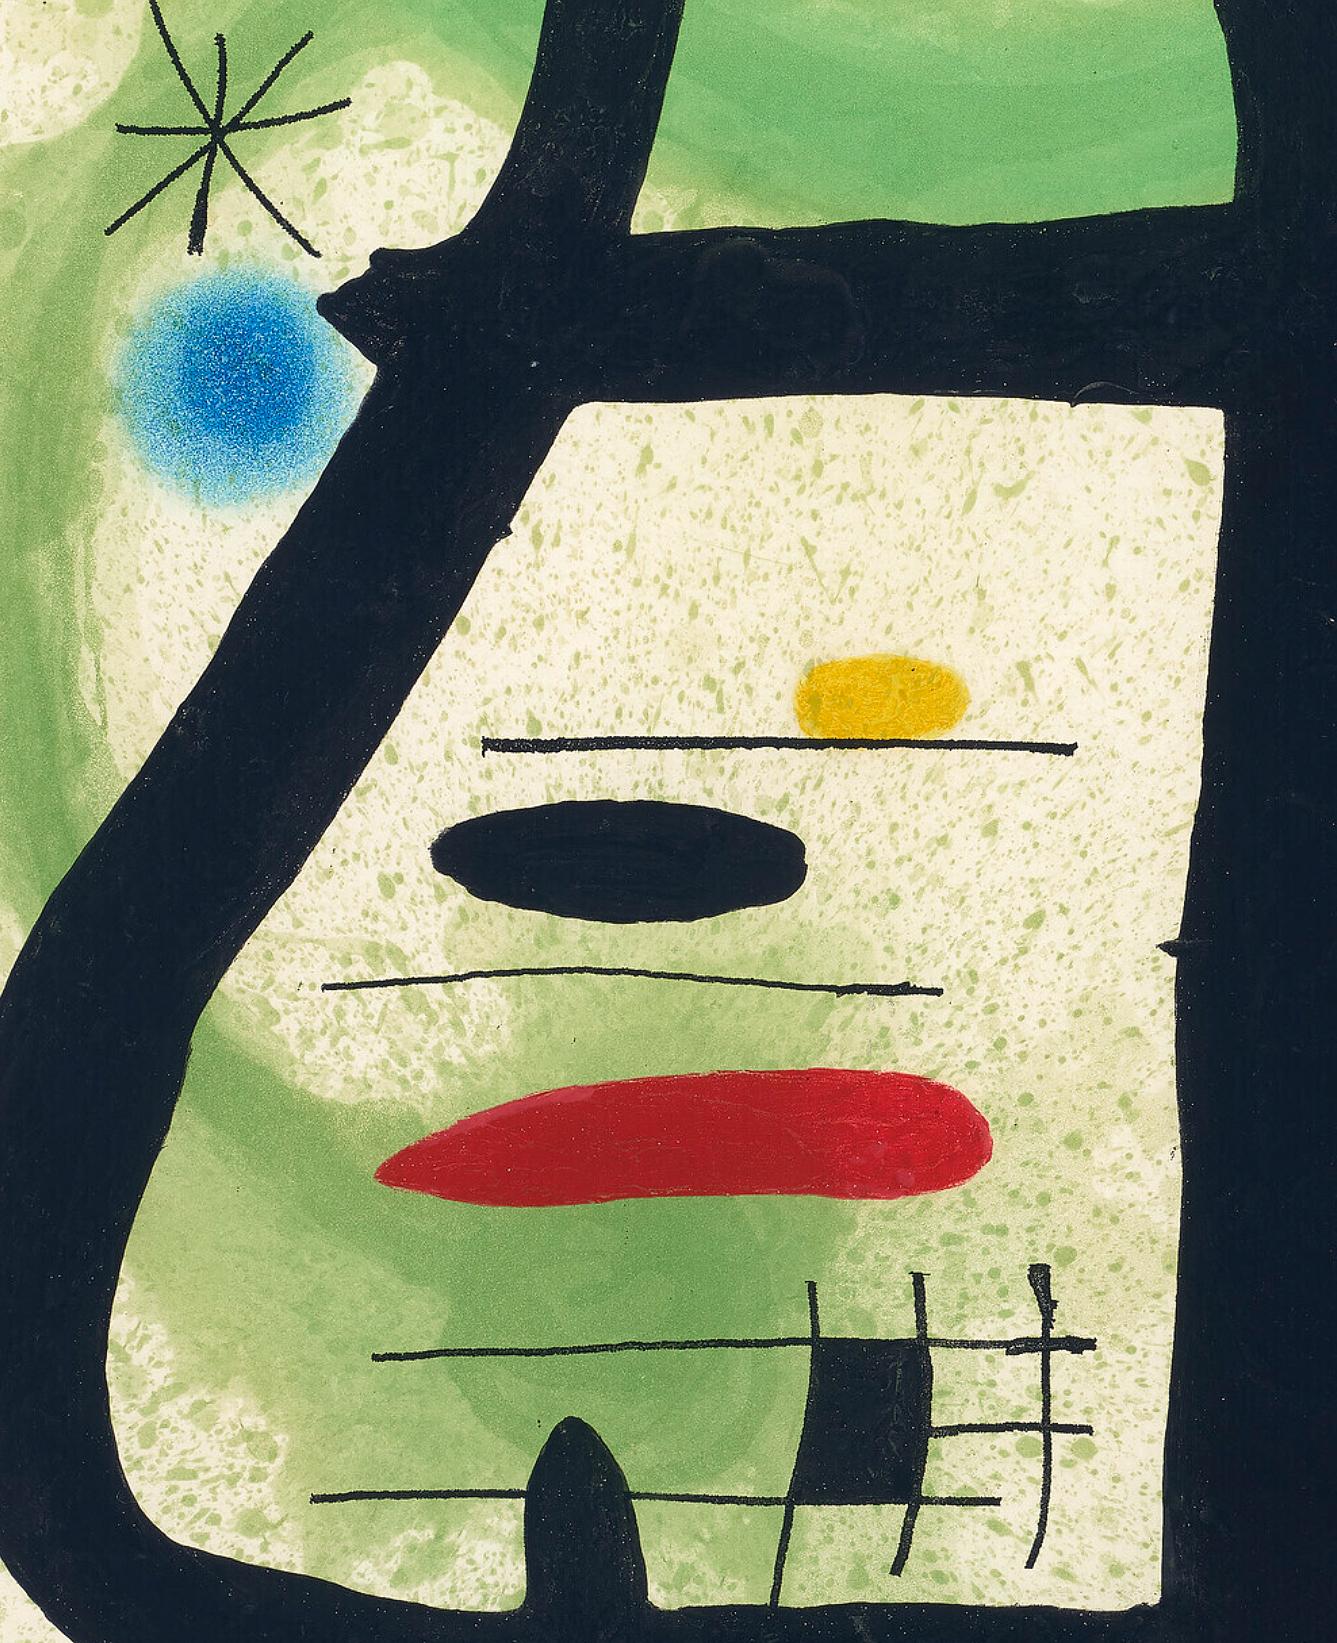 Miró's La Sorcière (The Sorcerer), 1969 is a monumental piece whose abstract forms work in combination with splashes of green and red. Each element coexists in perfect harmony, echoing a geometric, surrealist composition that leaves the viewer both